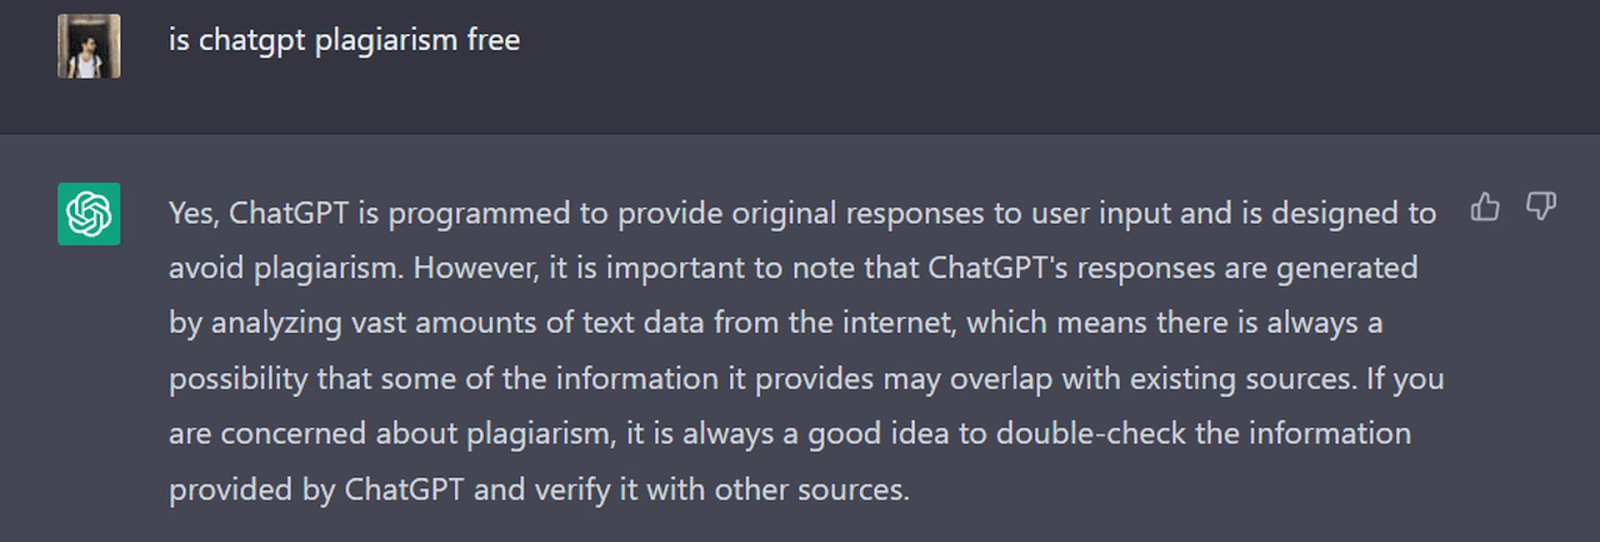 Chat GPT can free of plagiarism